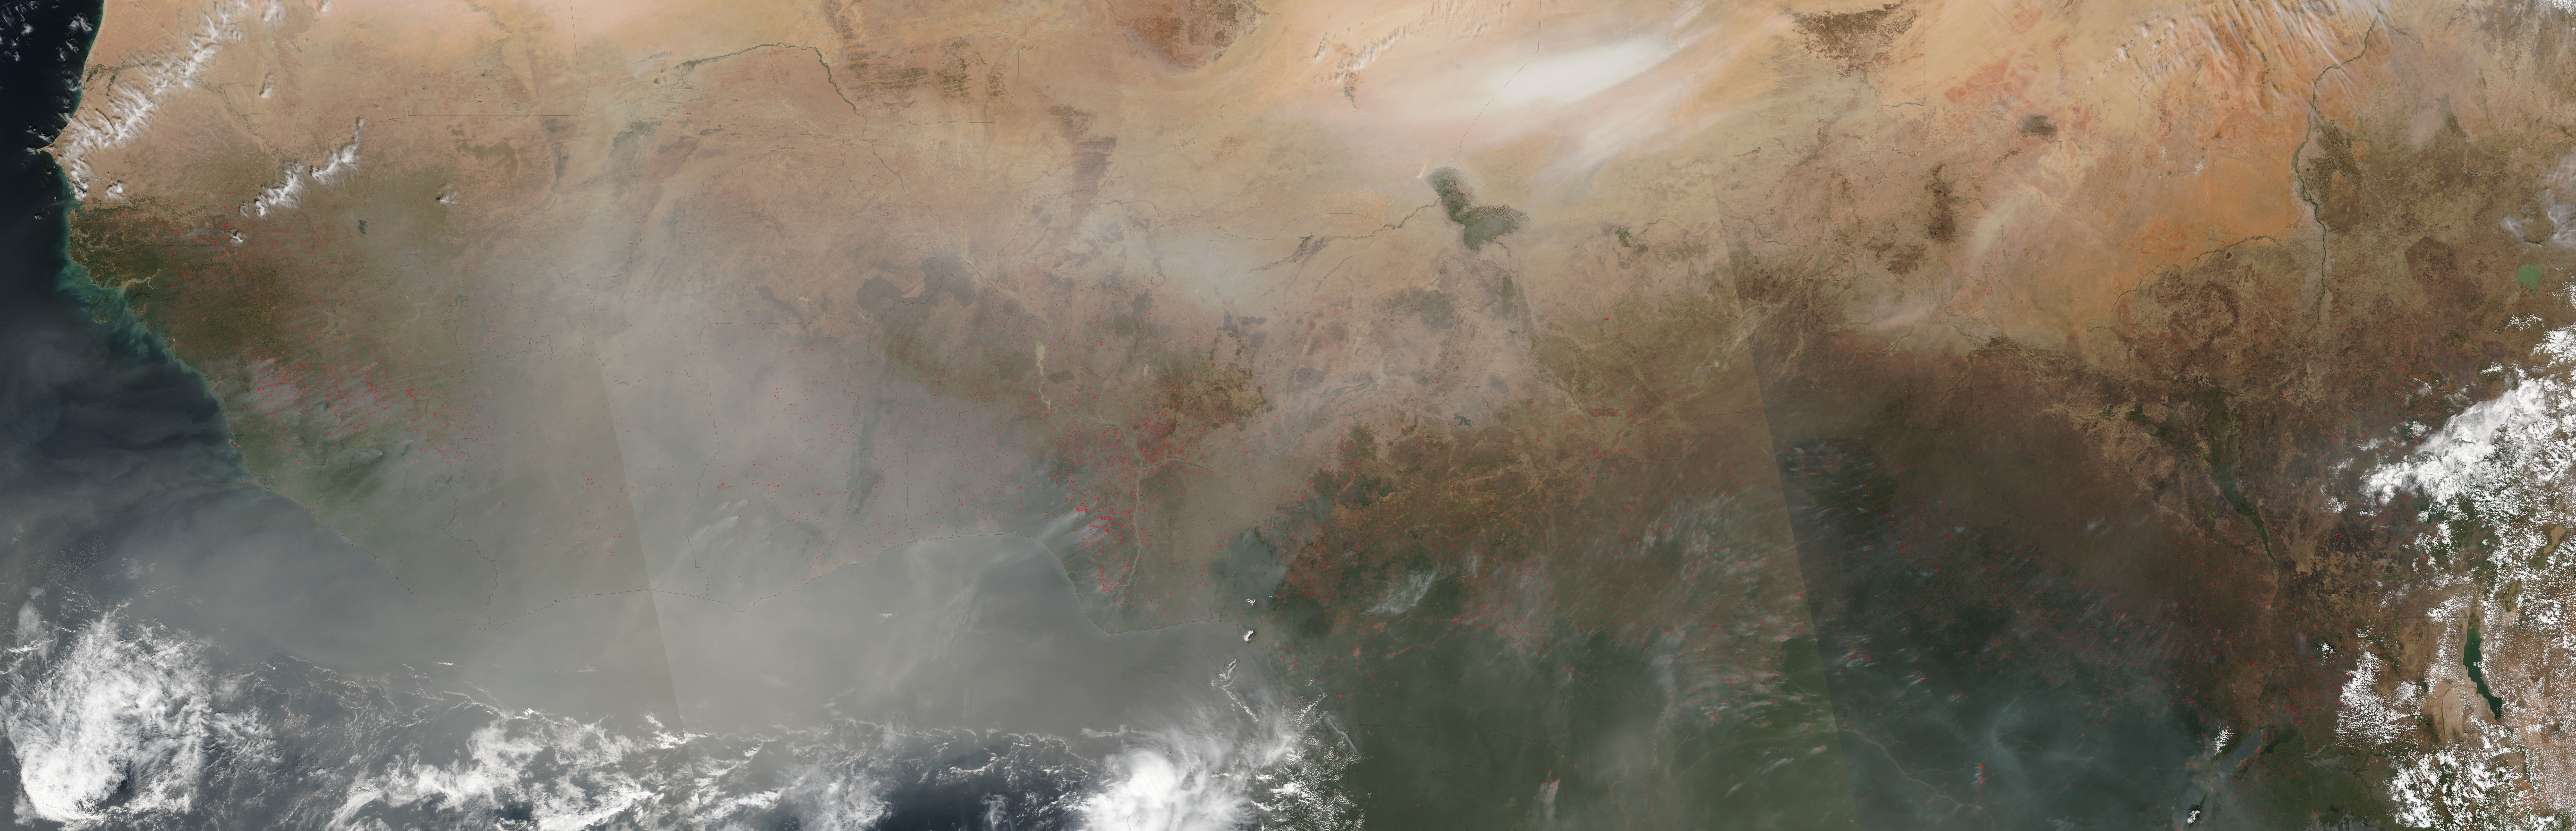 Fires and dust across Central Africa - related image preview